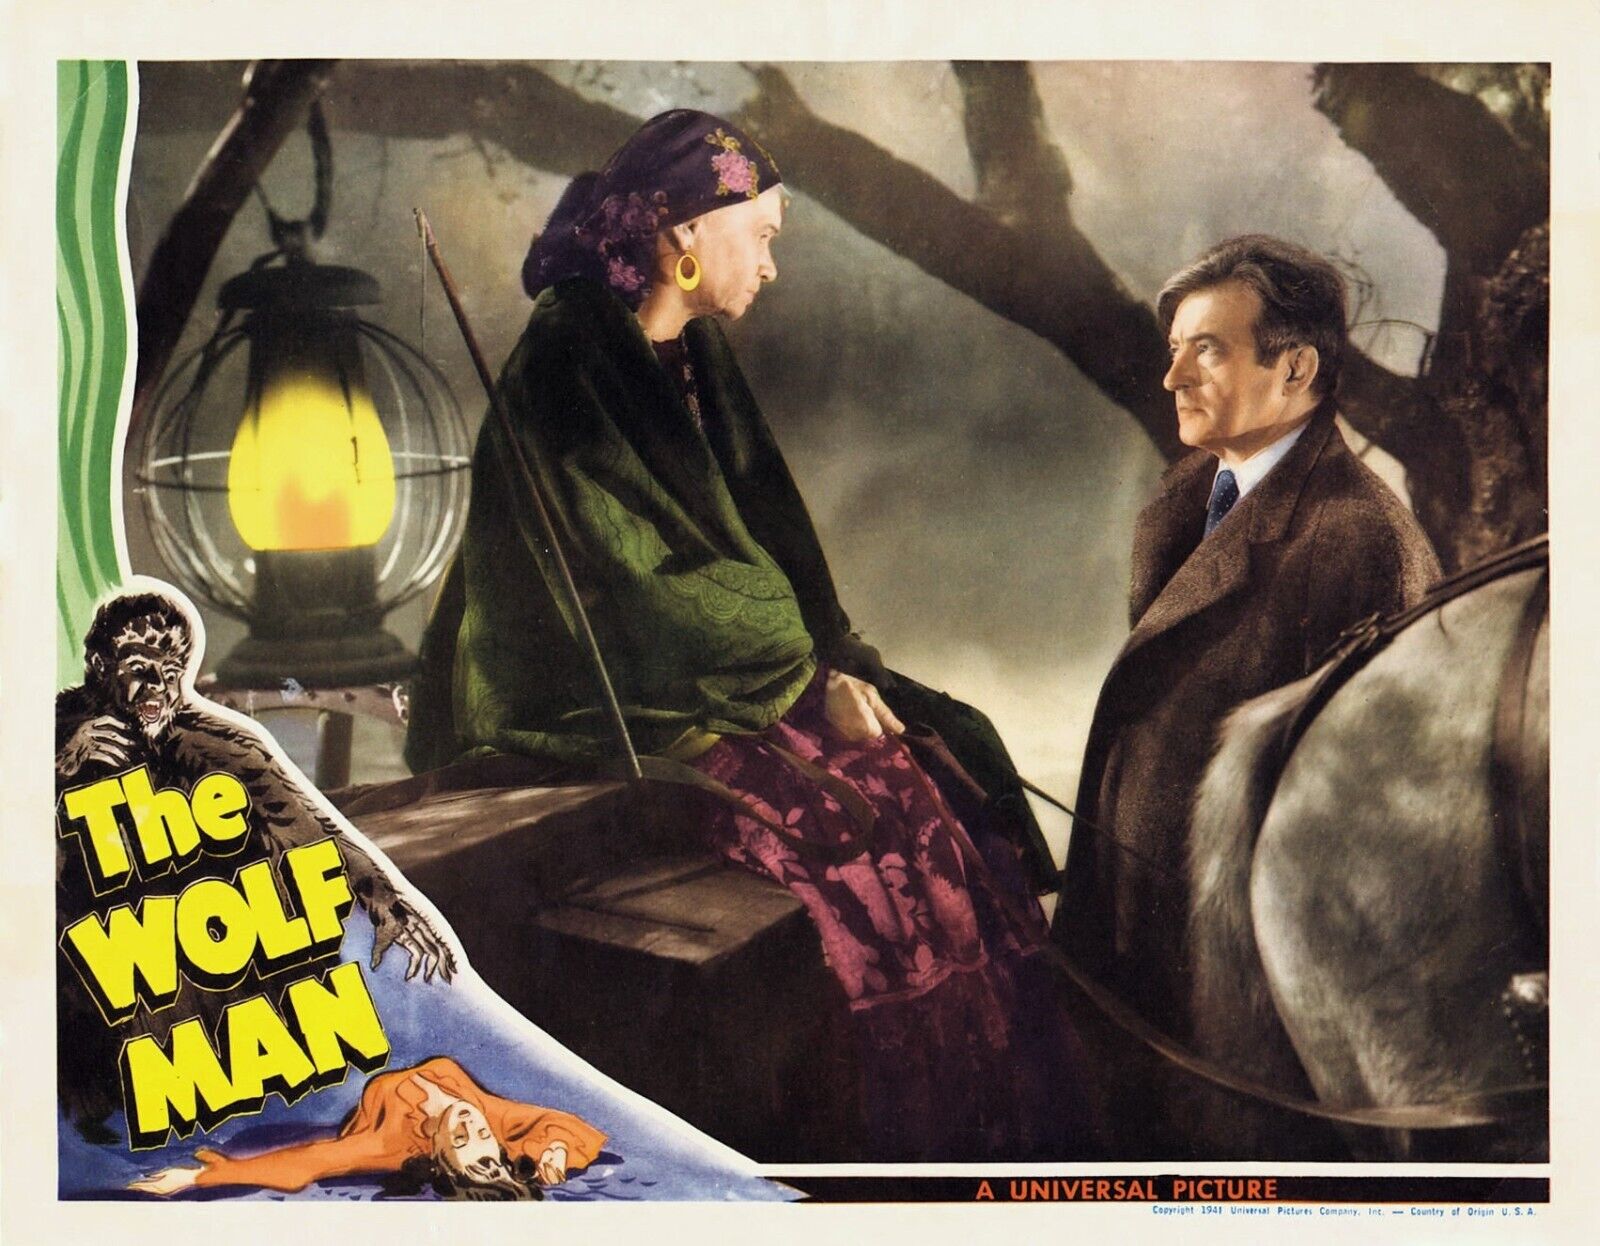 LON CHANEY JR THE WOLFMAN LOBBY CARD POSTER 8X10 PHOTO